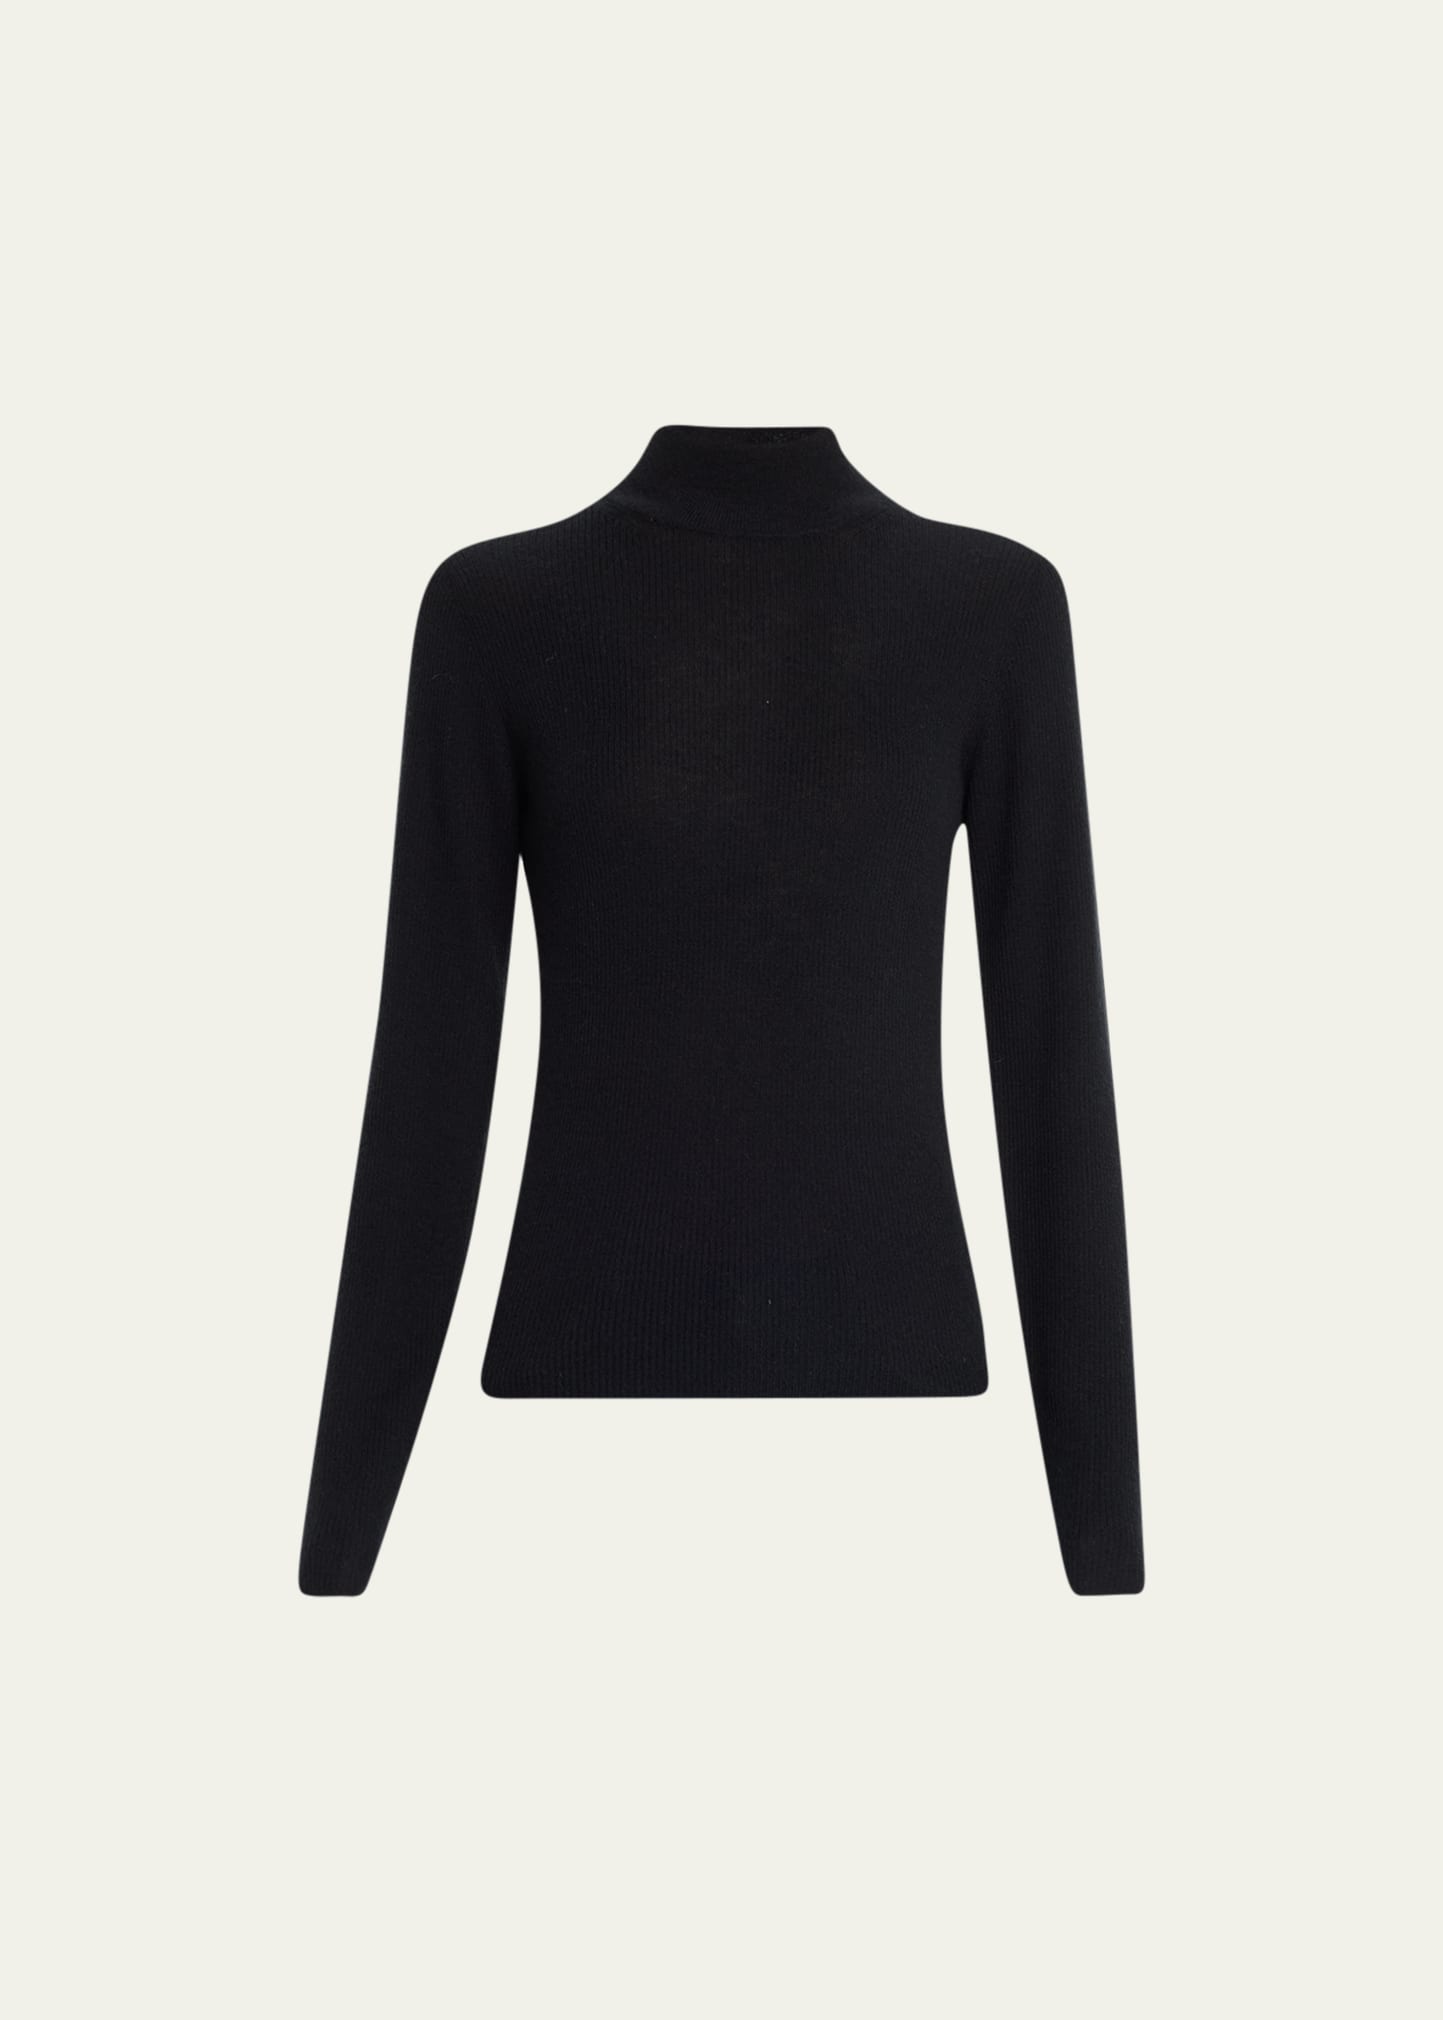 GUEST IN RESIDENCE CASHMERE BASE LAYER TURTLENECK SWEATER